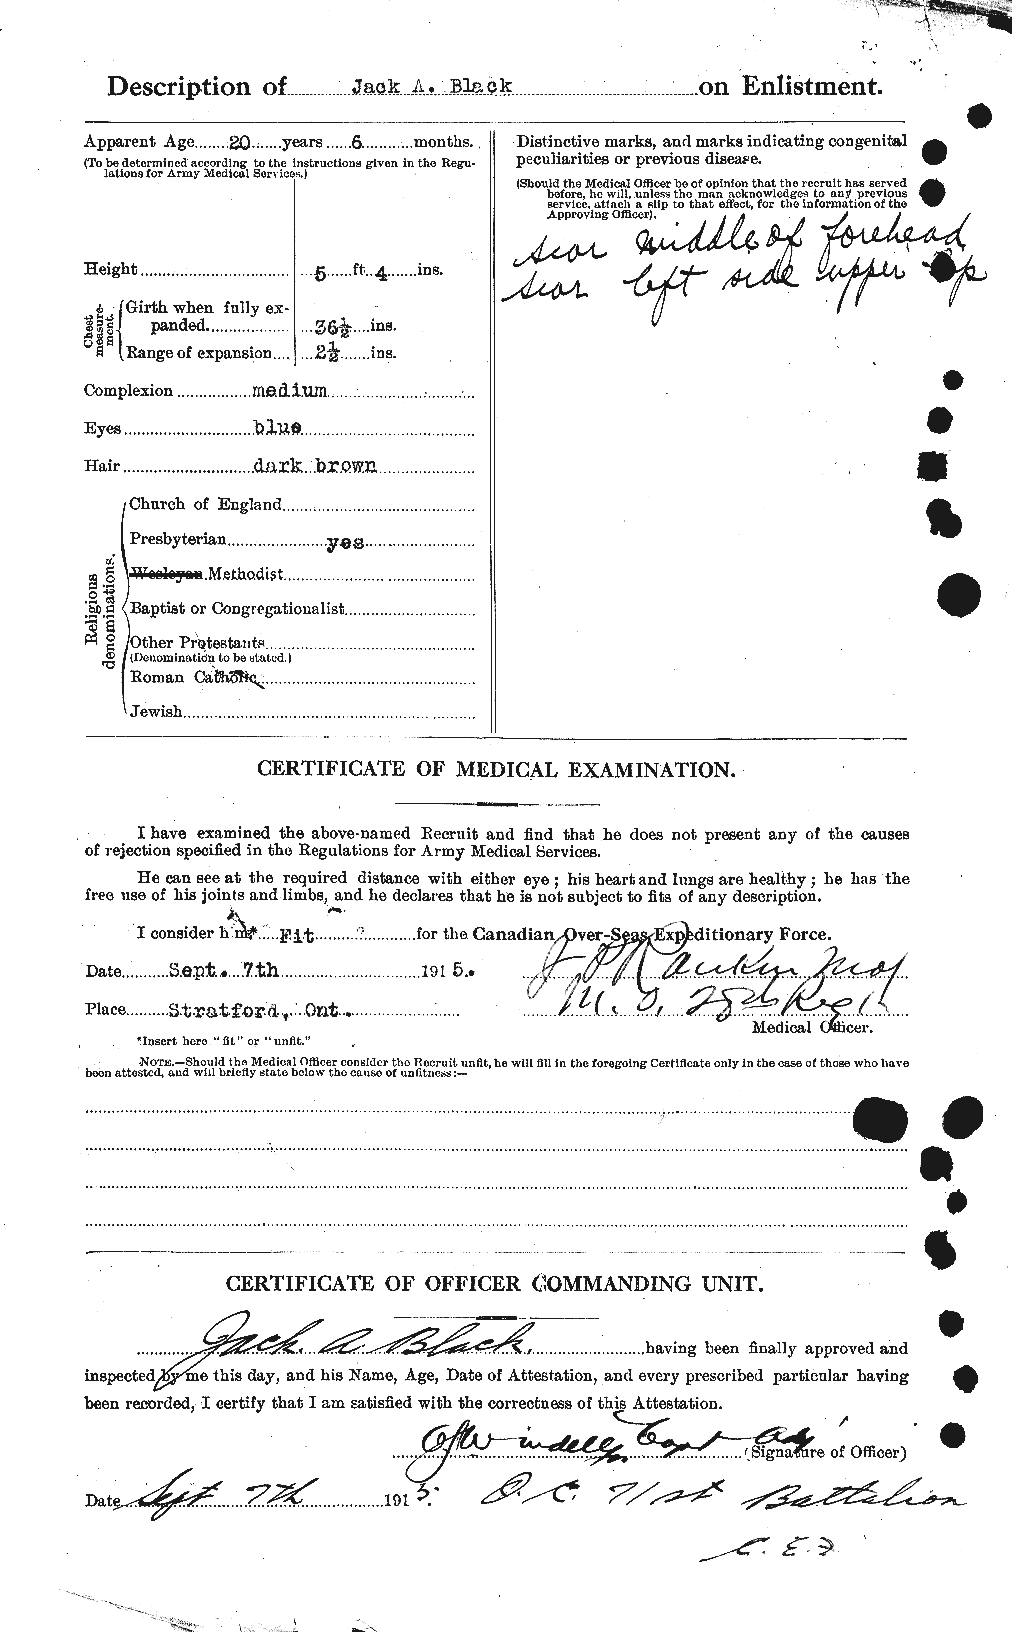 Personnel Records of the First World War - CEF 246818b